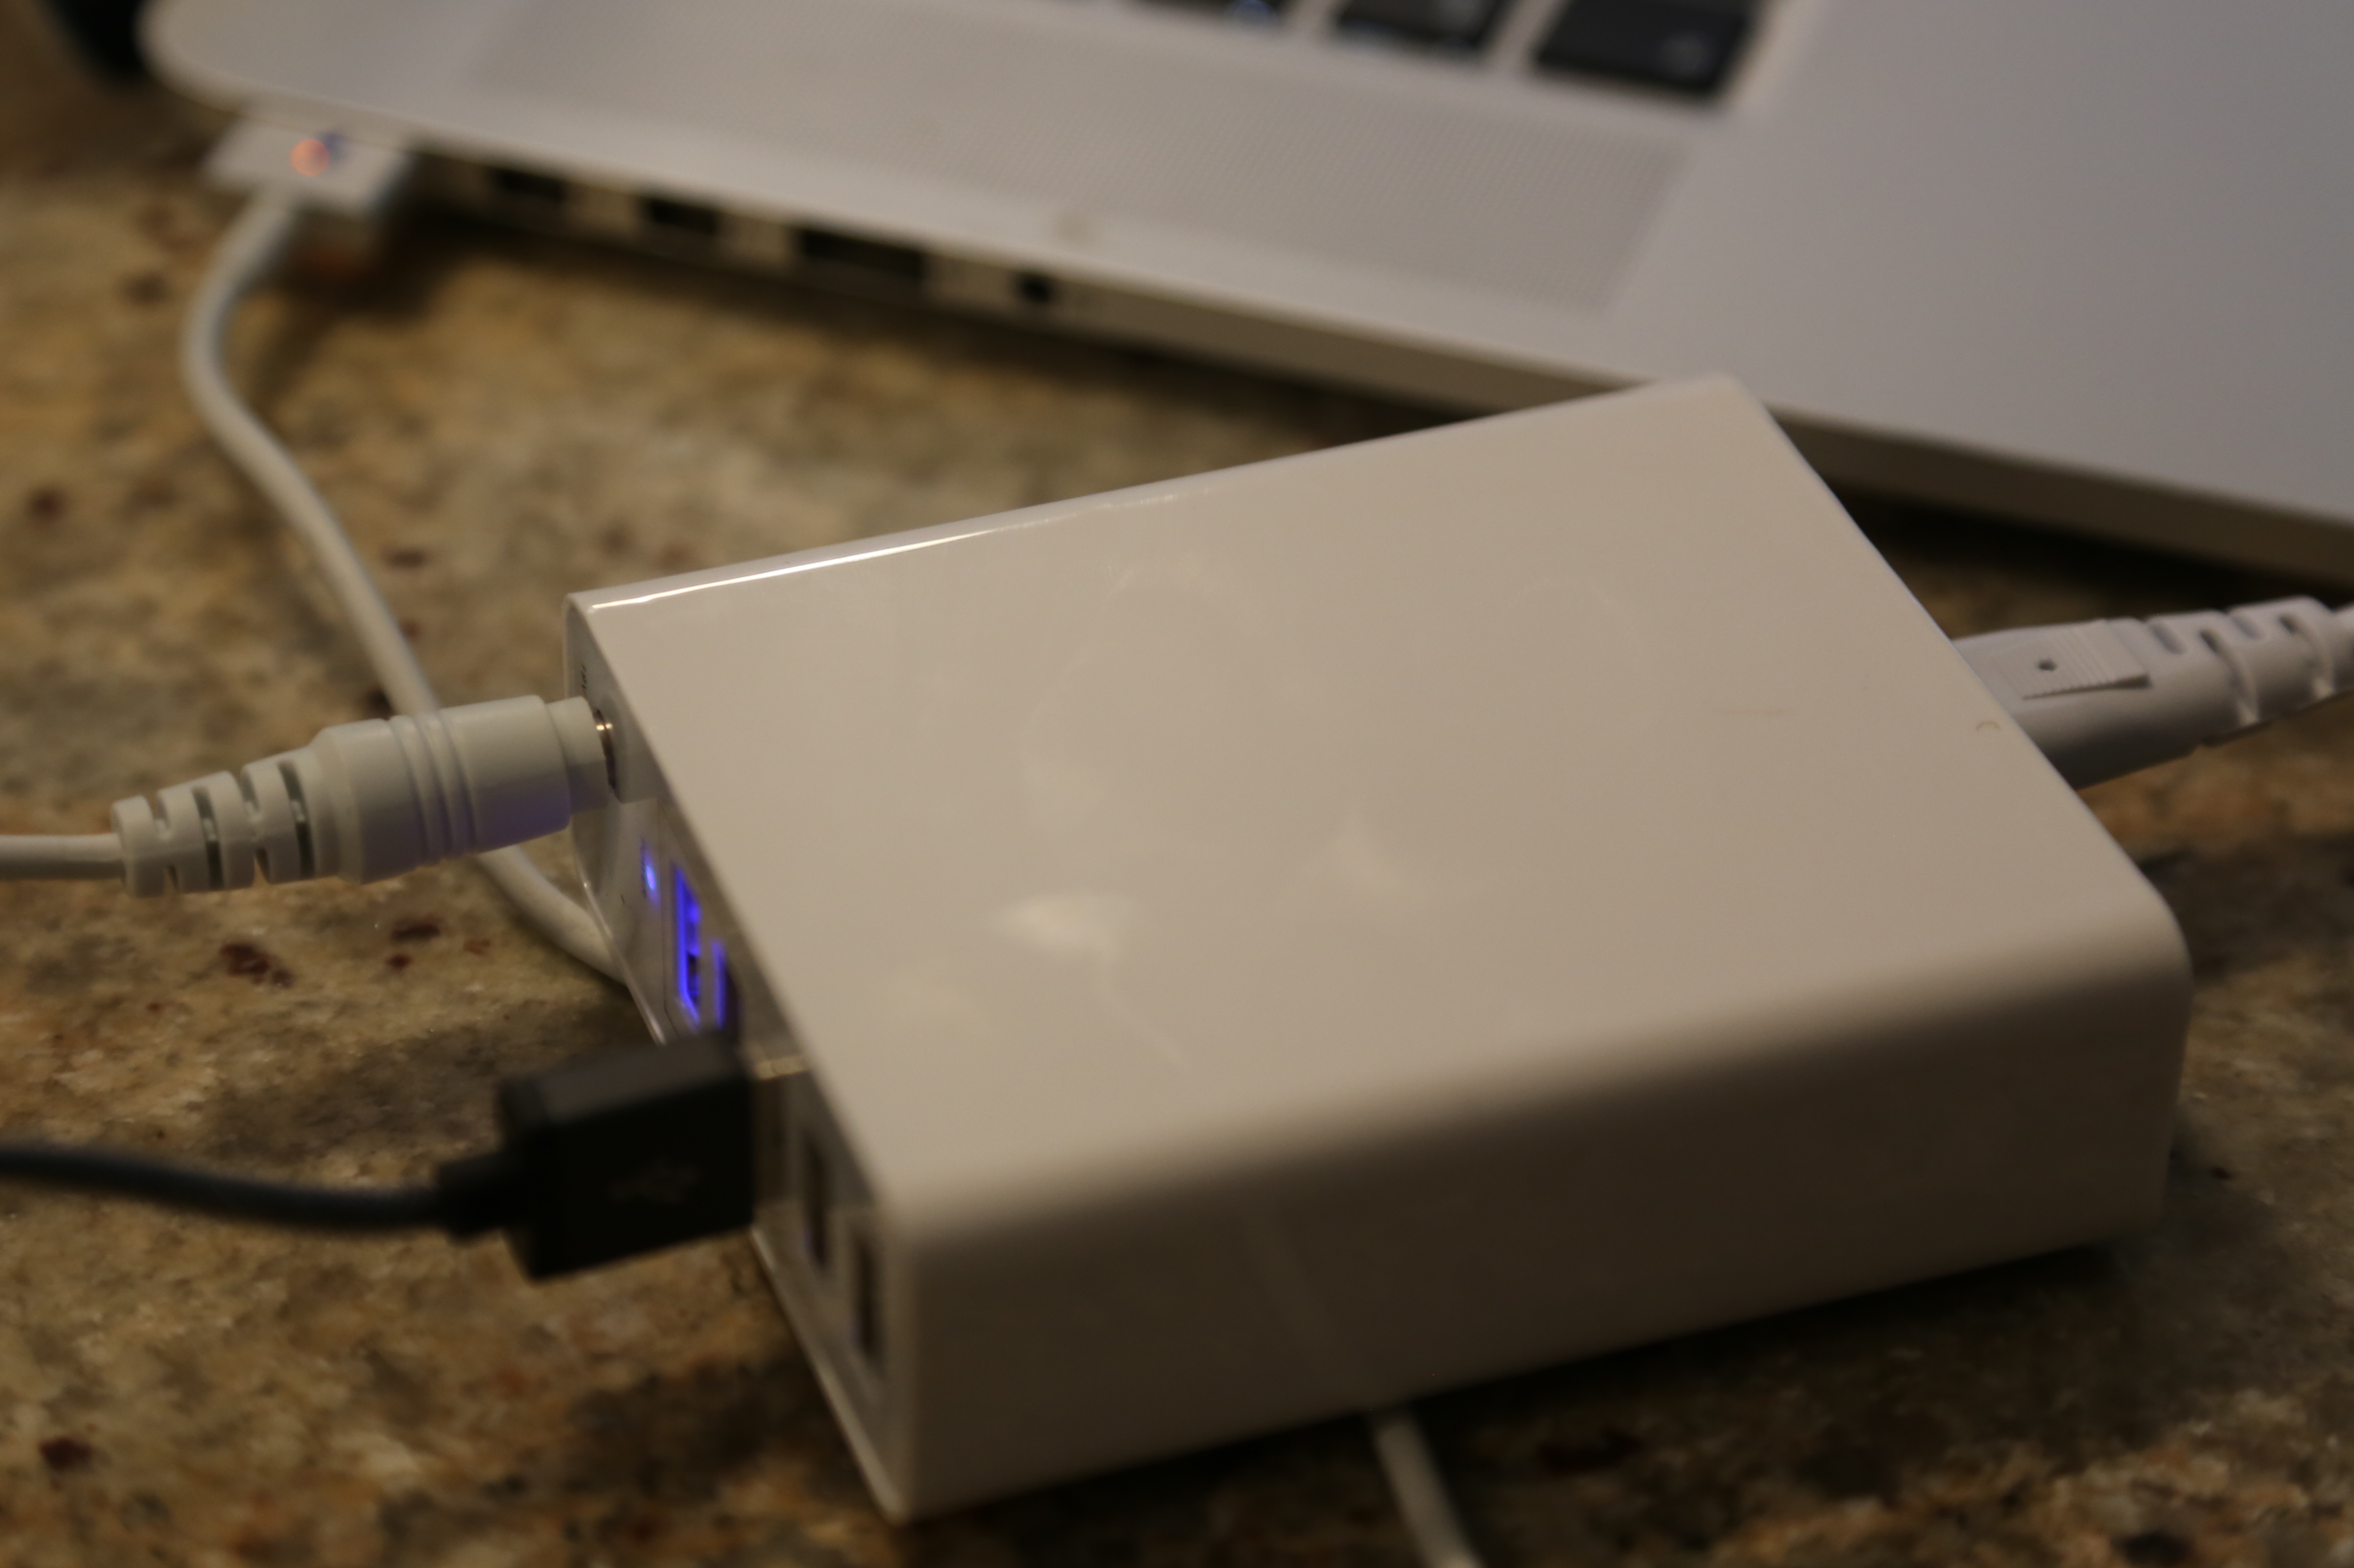 backup power supply for macbook pro with magsafe 2